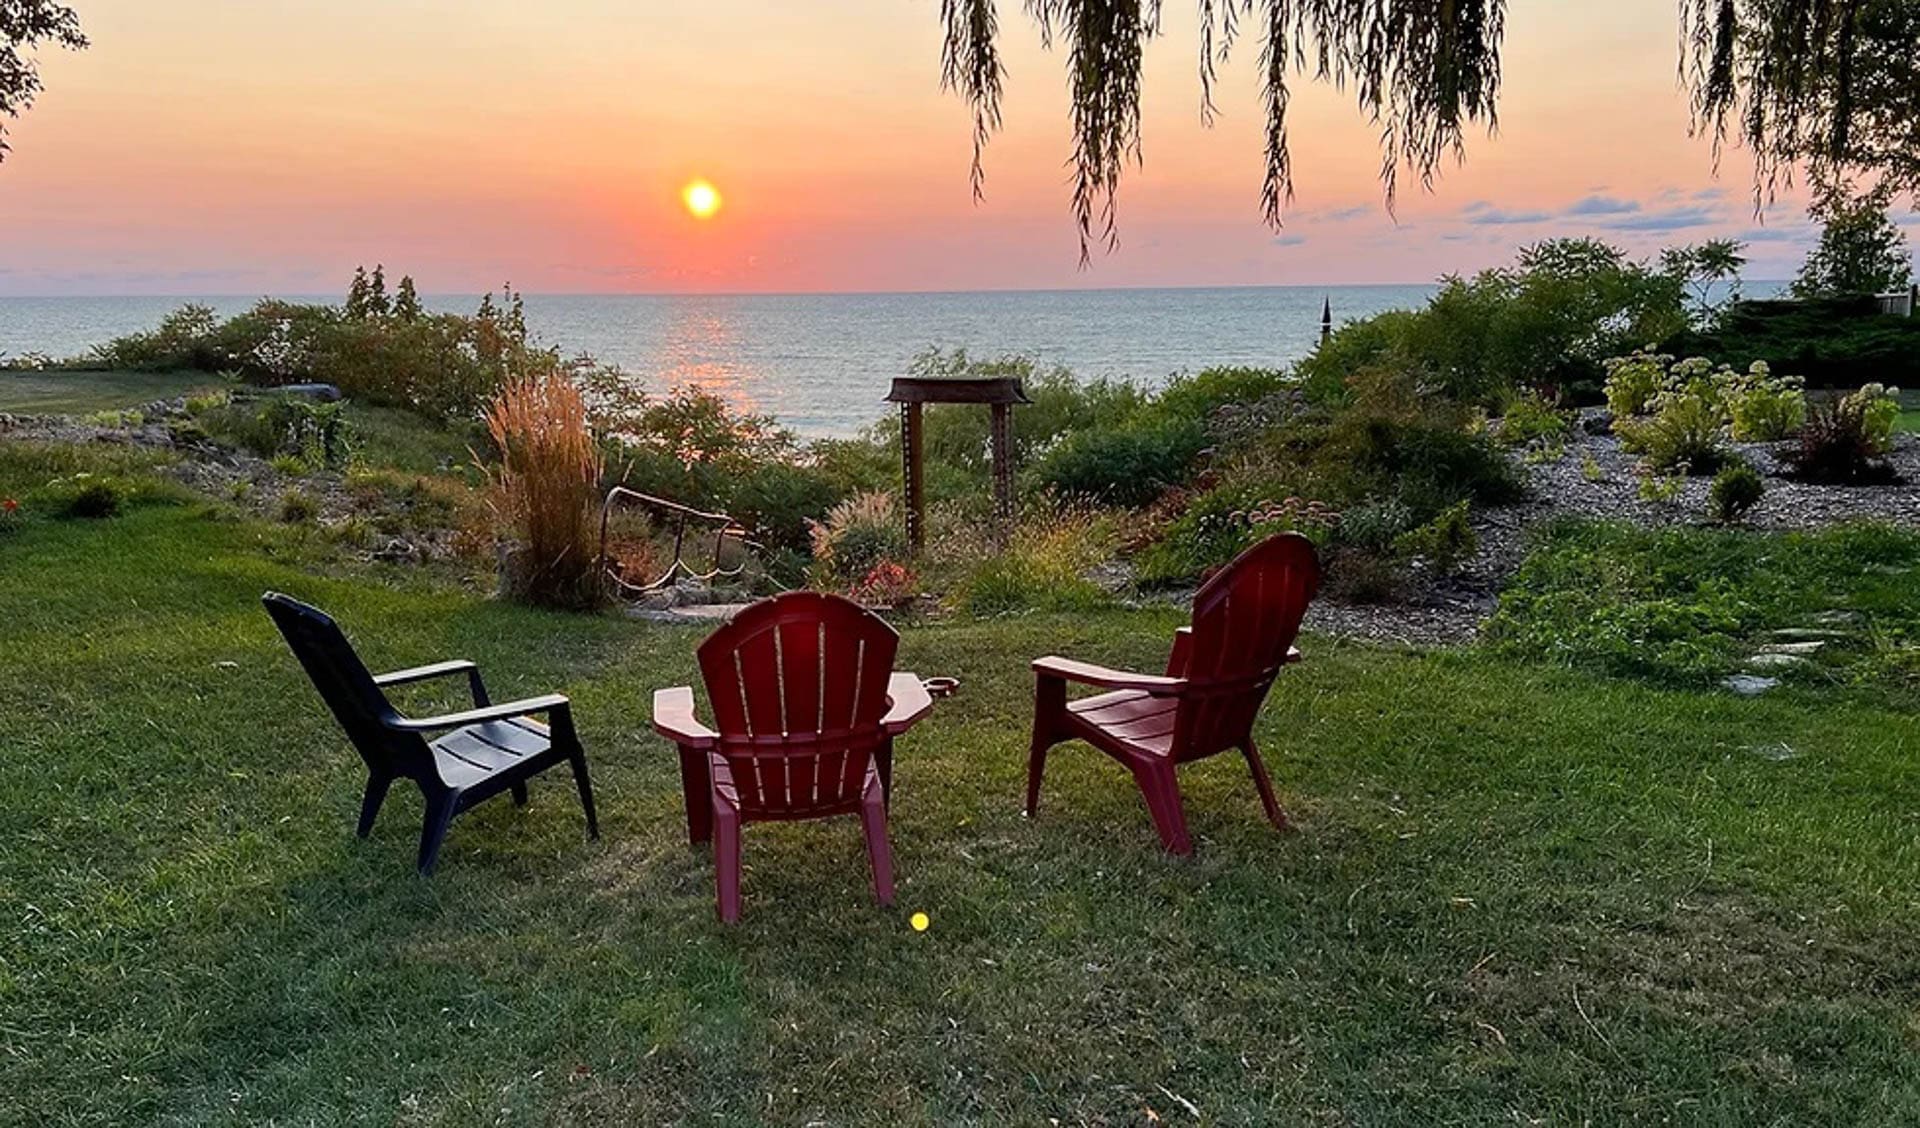 Bedrock Beach House lakeview lakefront cottage vacation rental pet friendly 2bedroom Hottub bayfield goderich grand bend lake huron ontario cottage rental